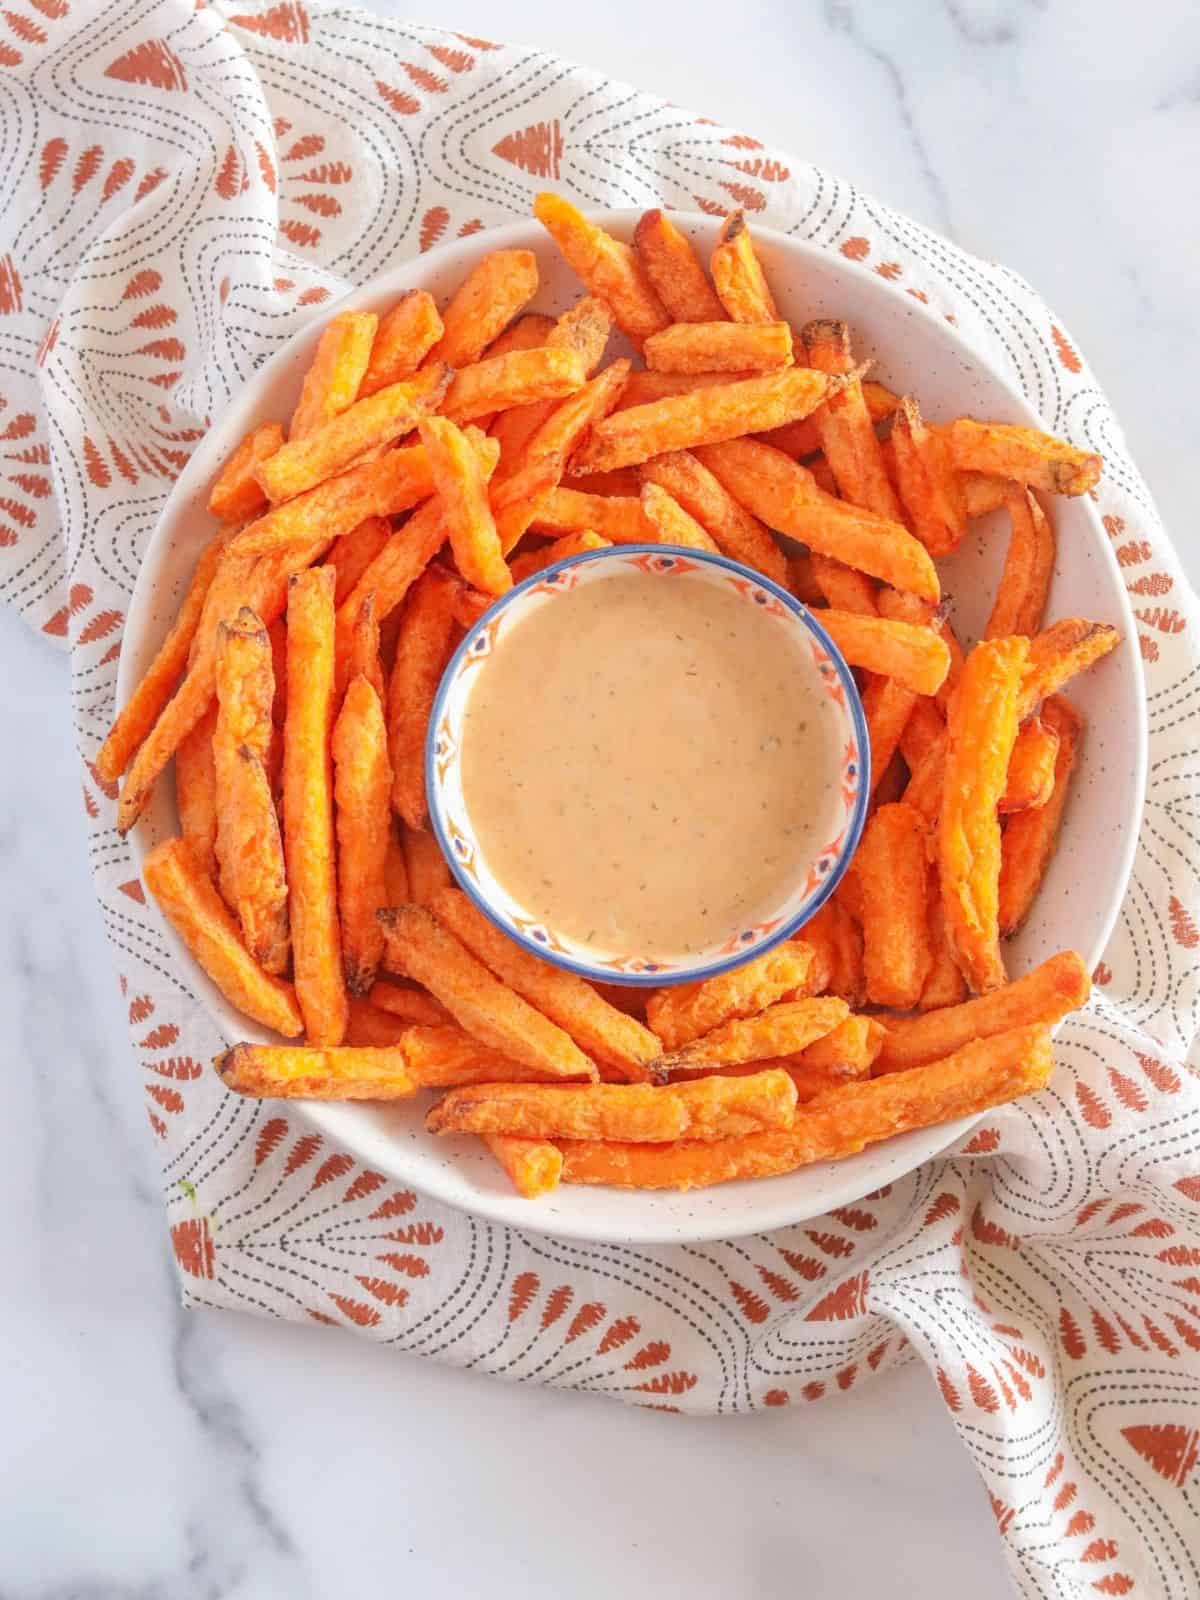 vegetables with BBQ Ranch dipping sauce on napkin